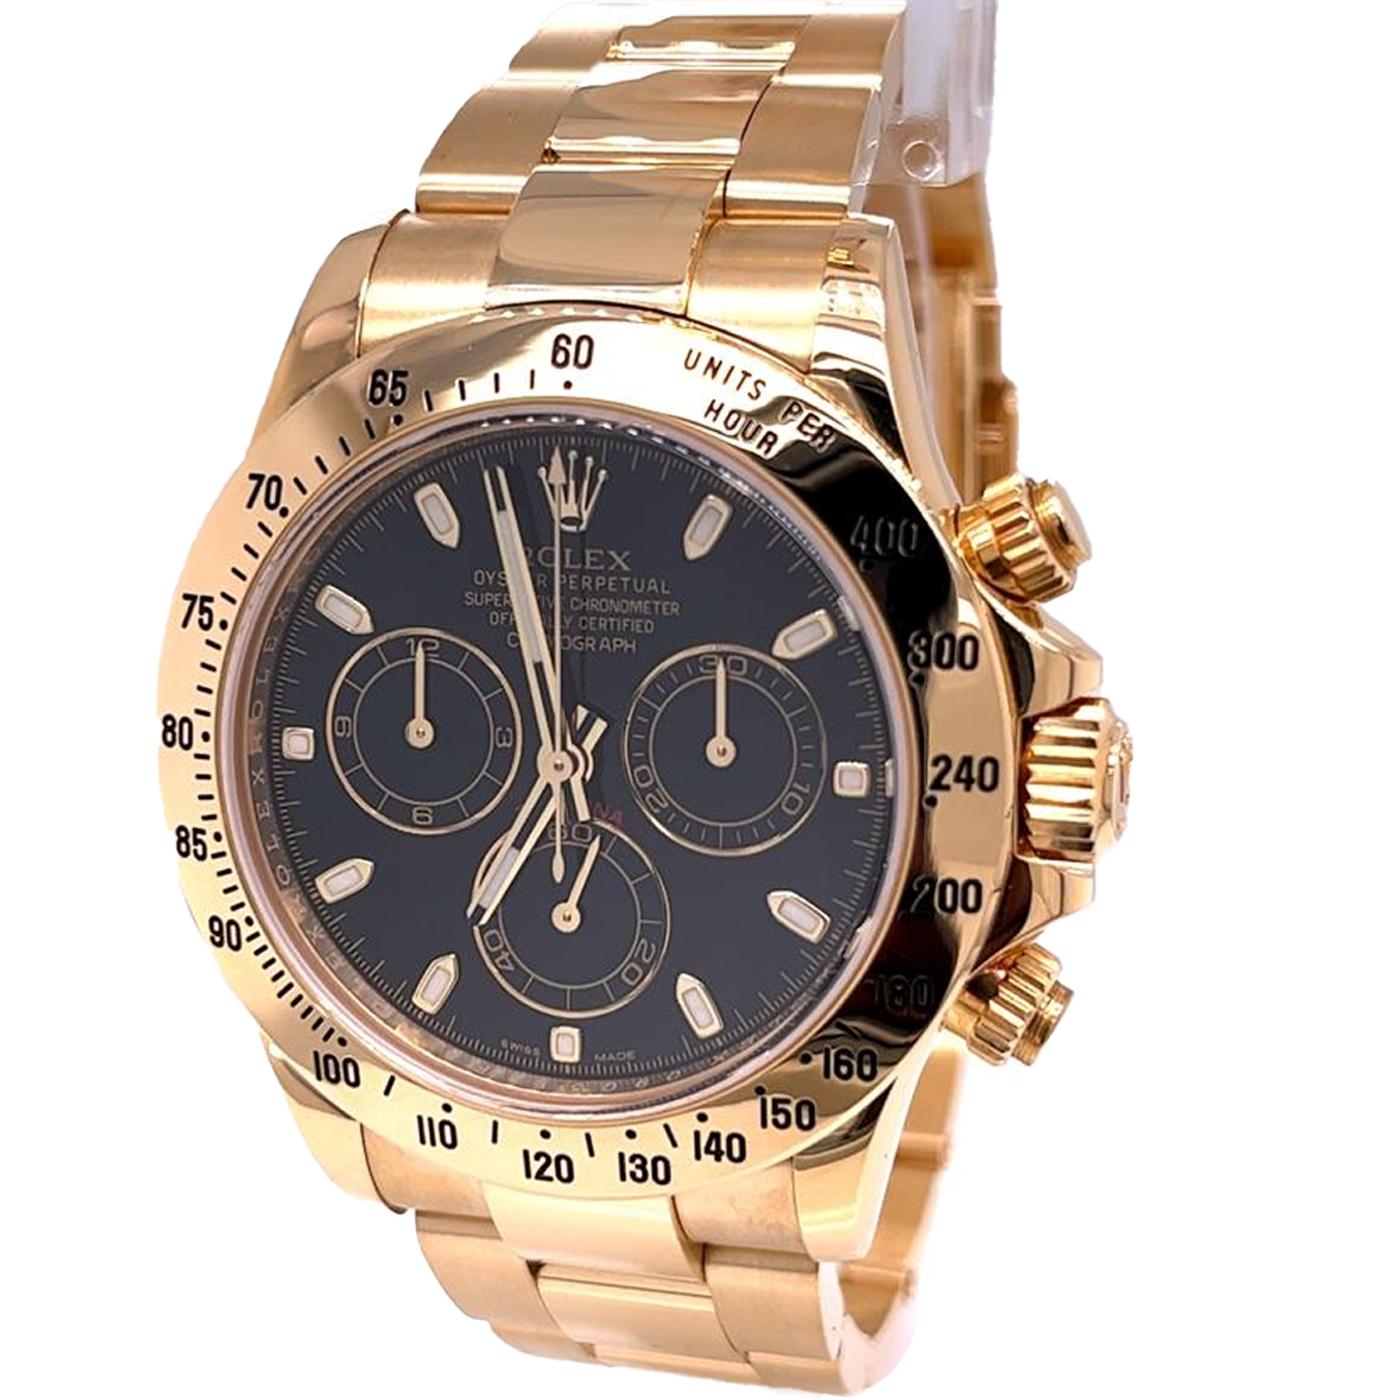 The Rolex Daytona 116528H is the all-gold variation of the Cosmograph Daytona. The particular reference that is presented here is in the yellow gold finish, a 40mm Oyster case with a three-link Oyster bracelet, As a traditional Rolex chronograph,